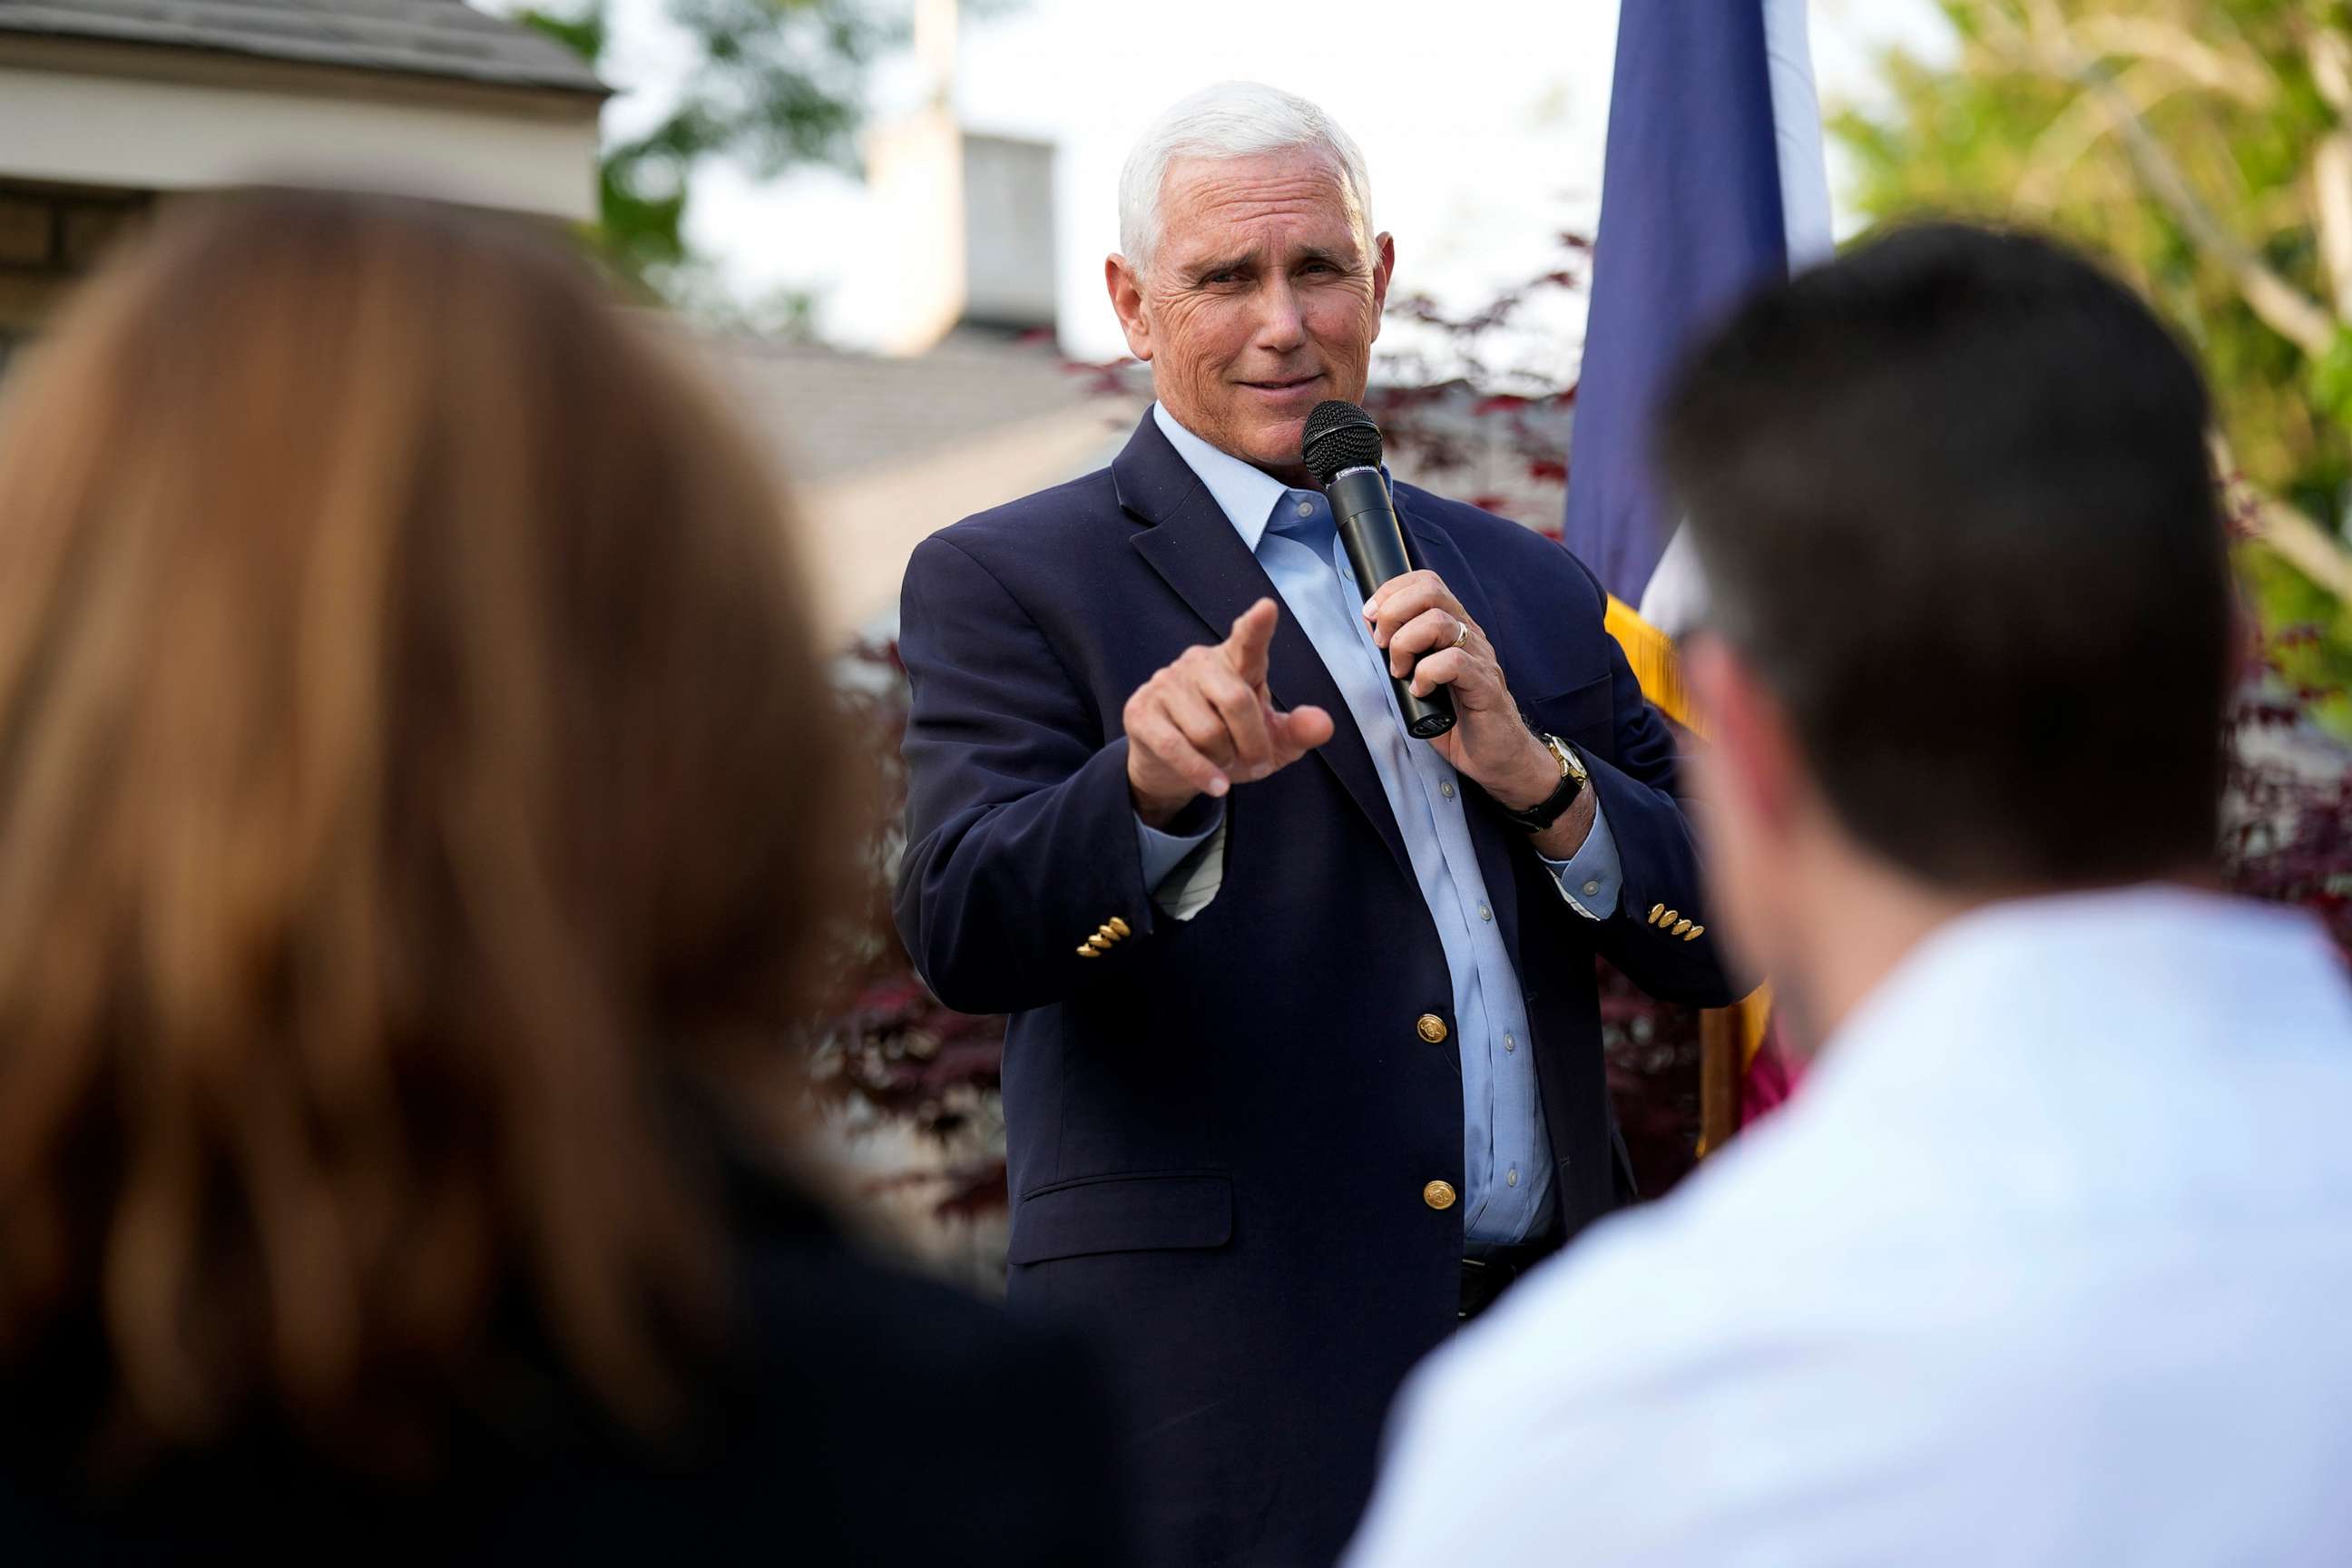 PHOTO: Former Vice President Mike Pence speaks to local residents during a meet and greet, May 23, 2023, in Des Moines, Iowa.